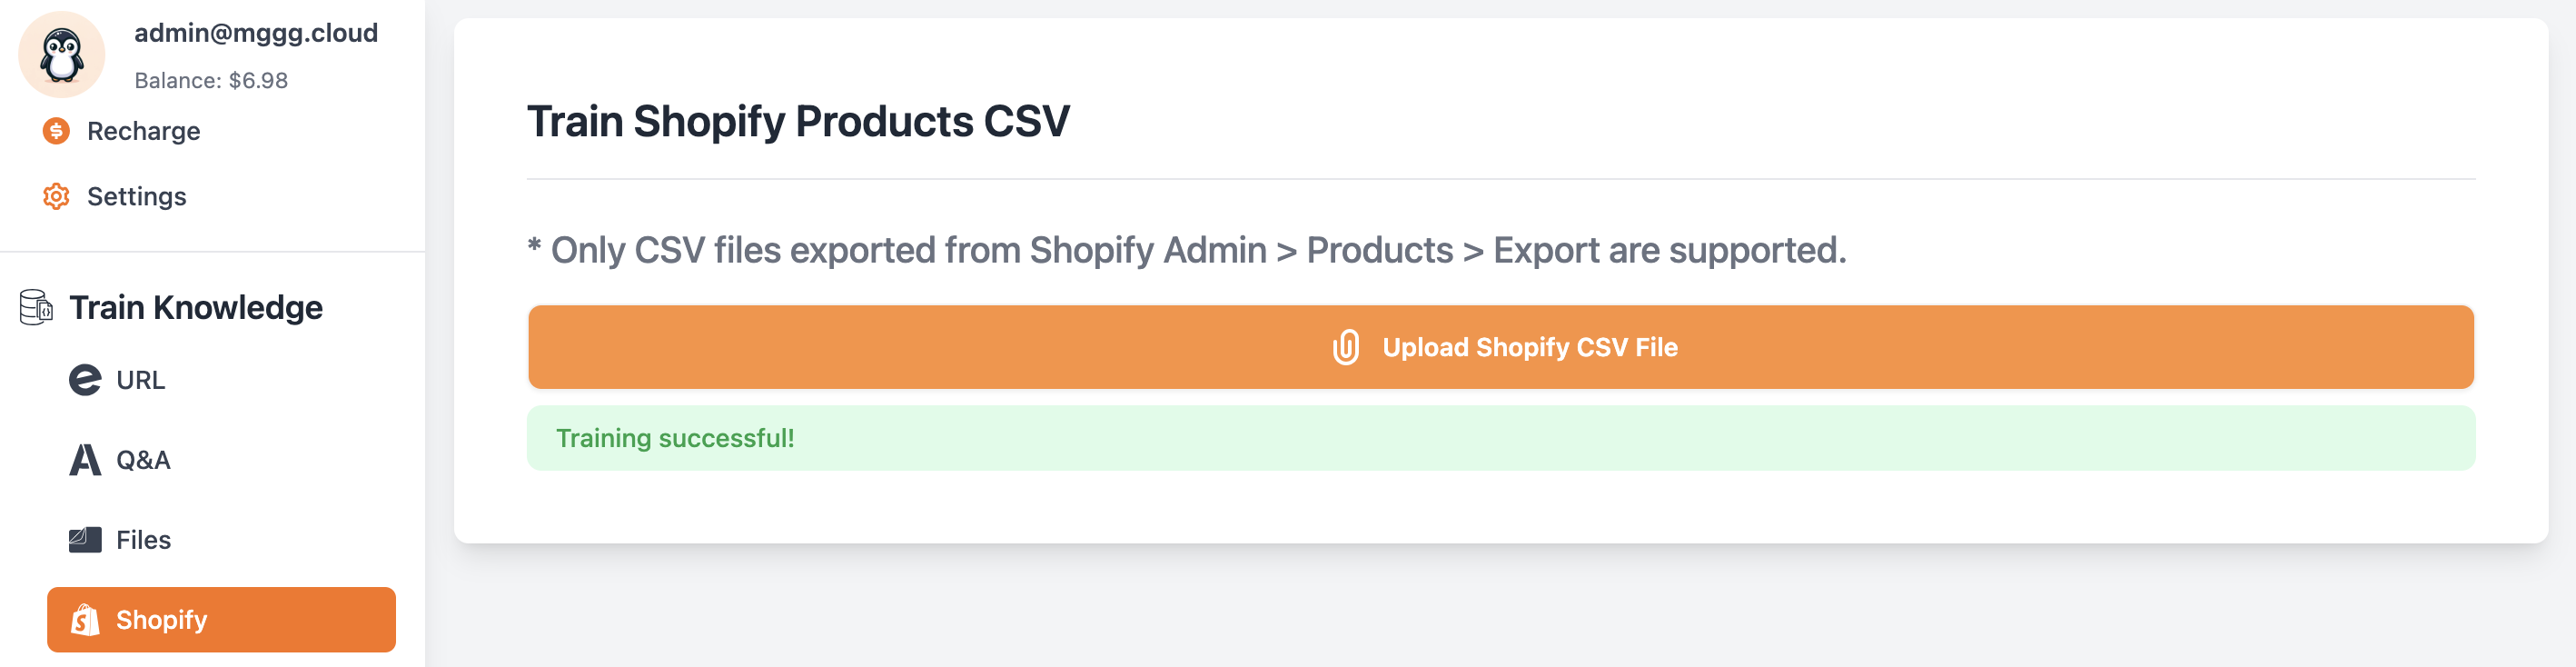 Train Shopify Products csv